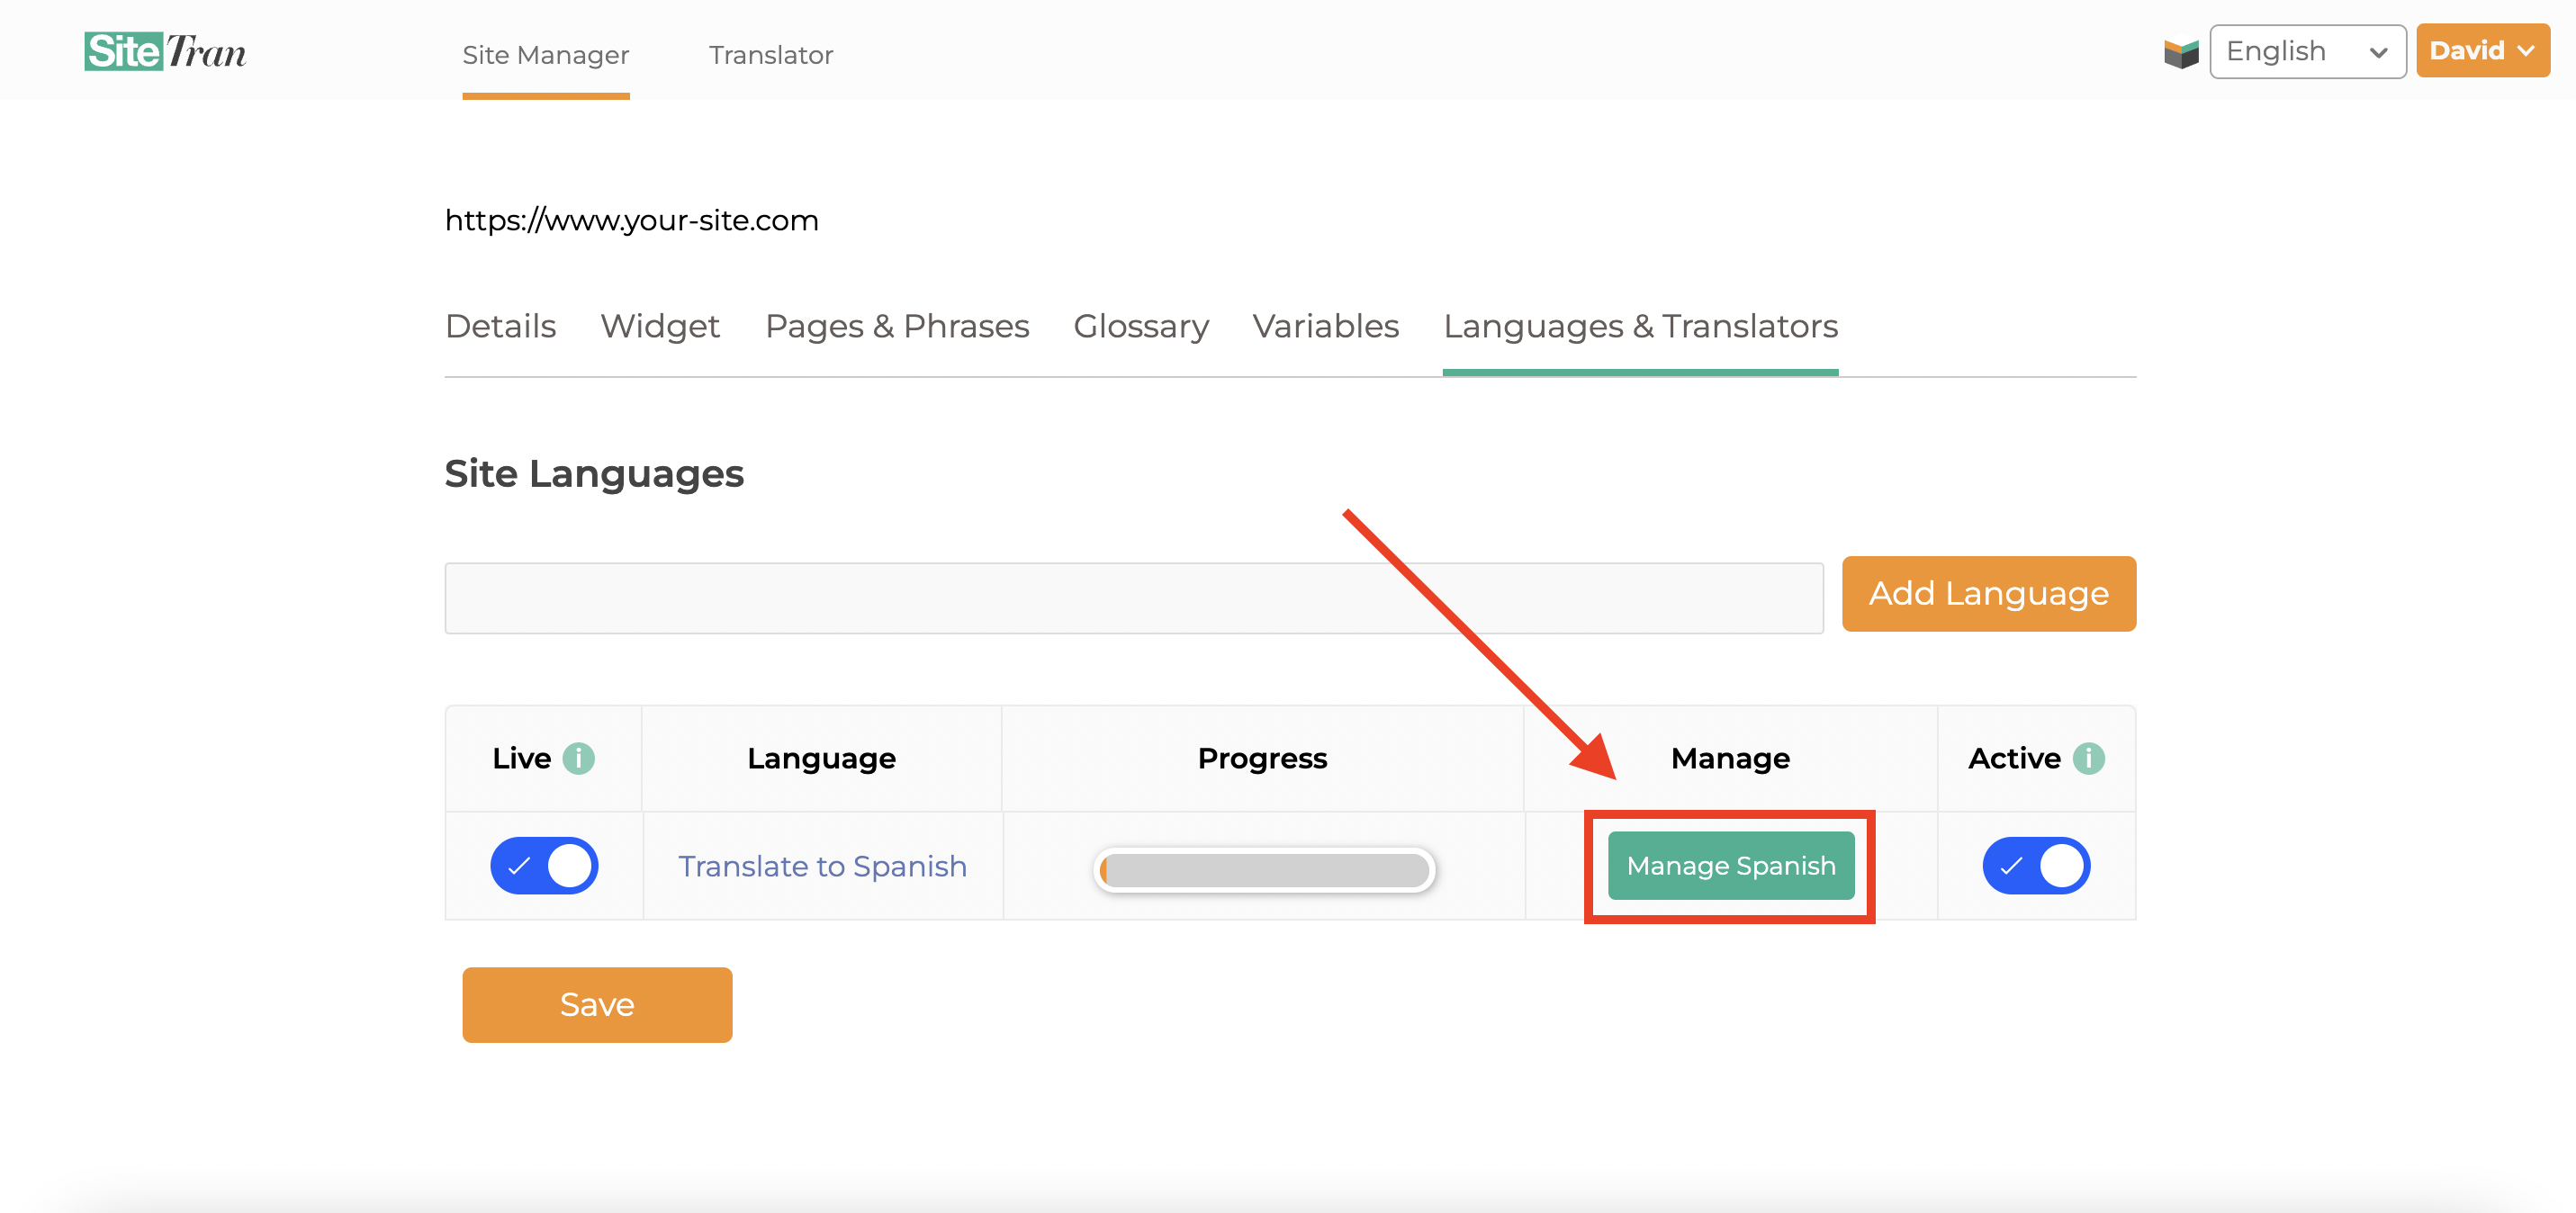 Click Manage <Your Language>